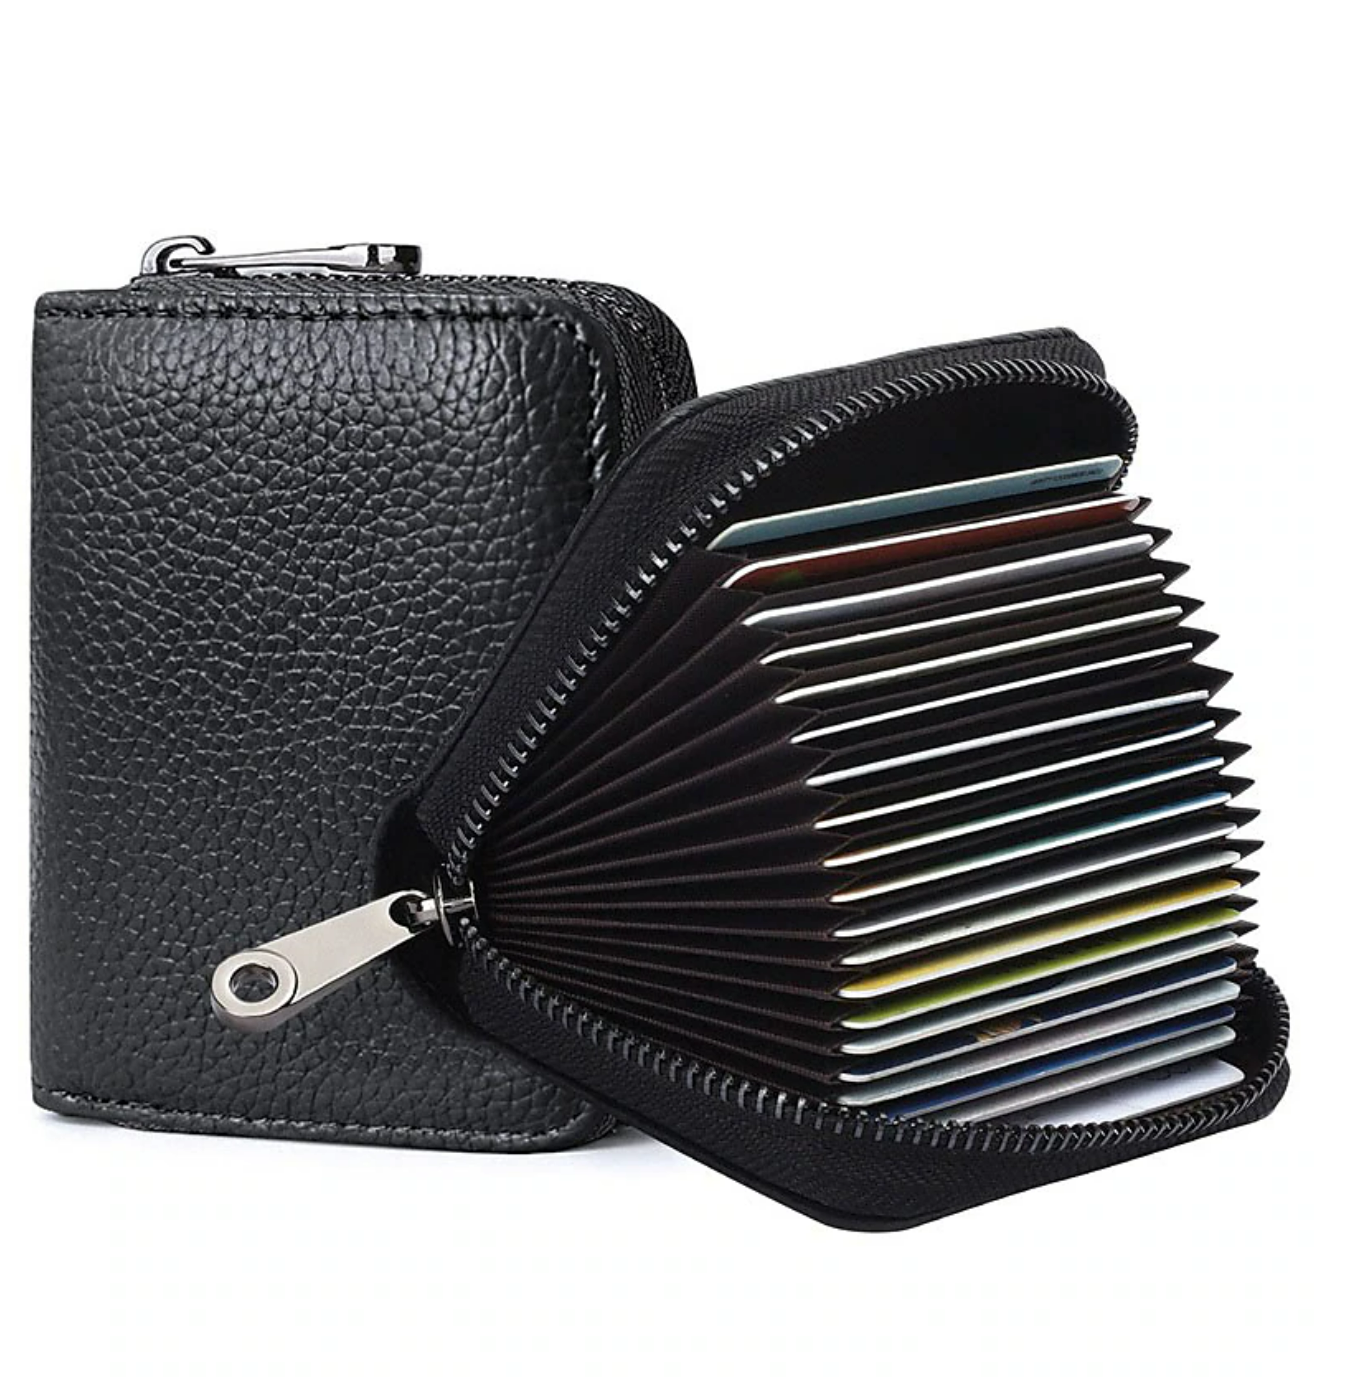 RFID 20 Card Slots Credit Card Holder Genuine Leather Small Card Case for Women or Men Accordion Wallet with Zipper